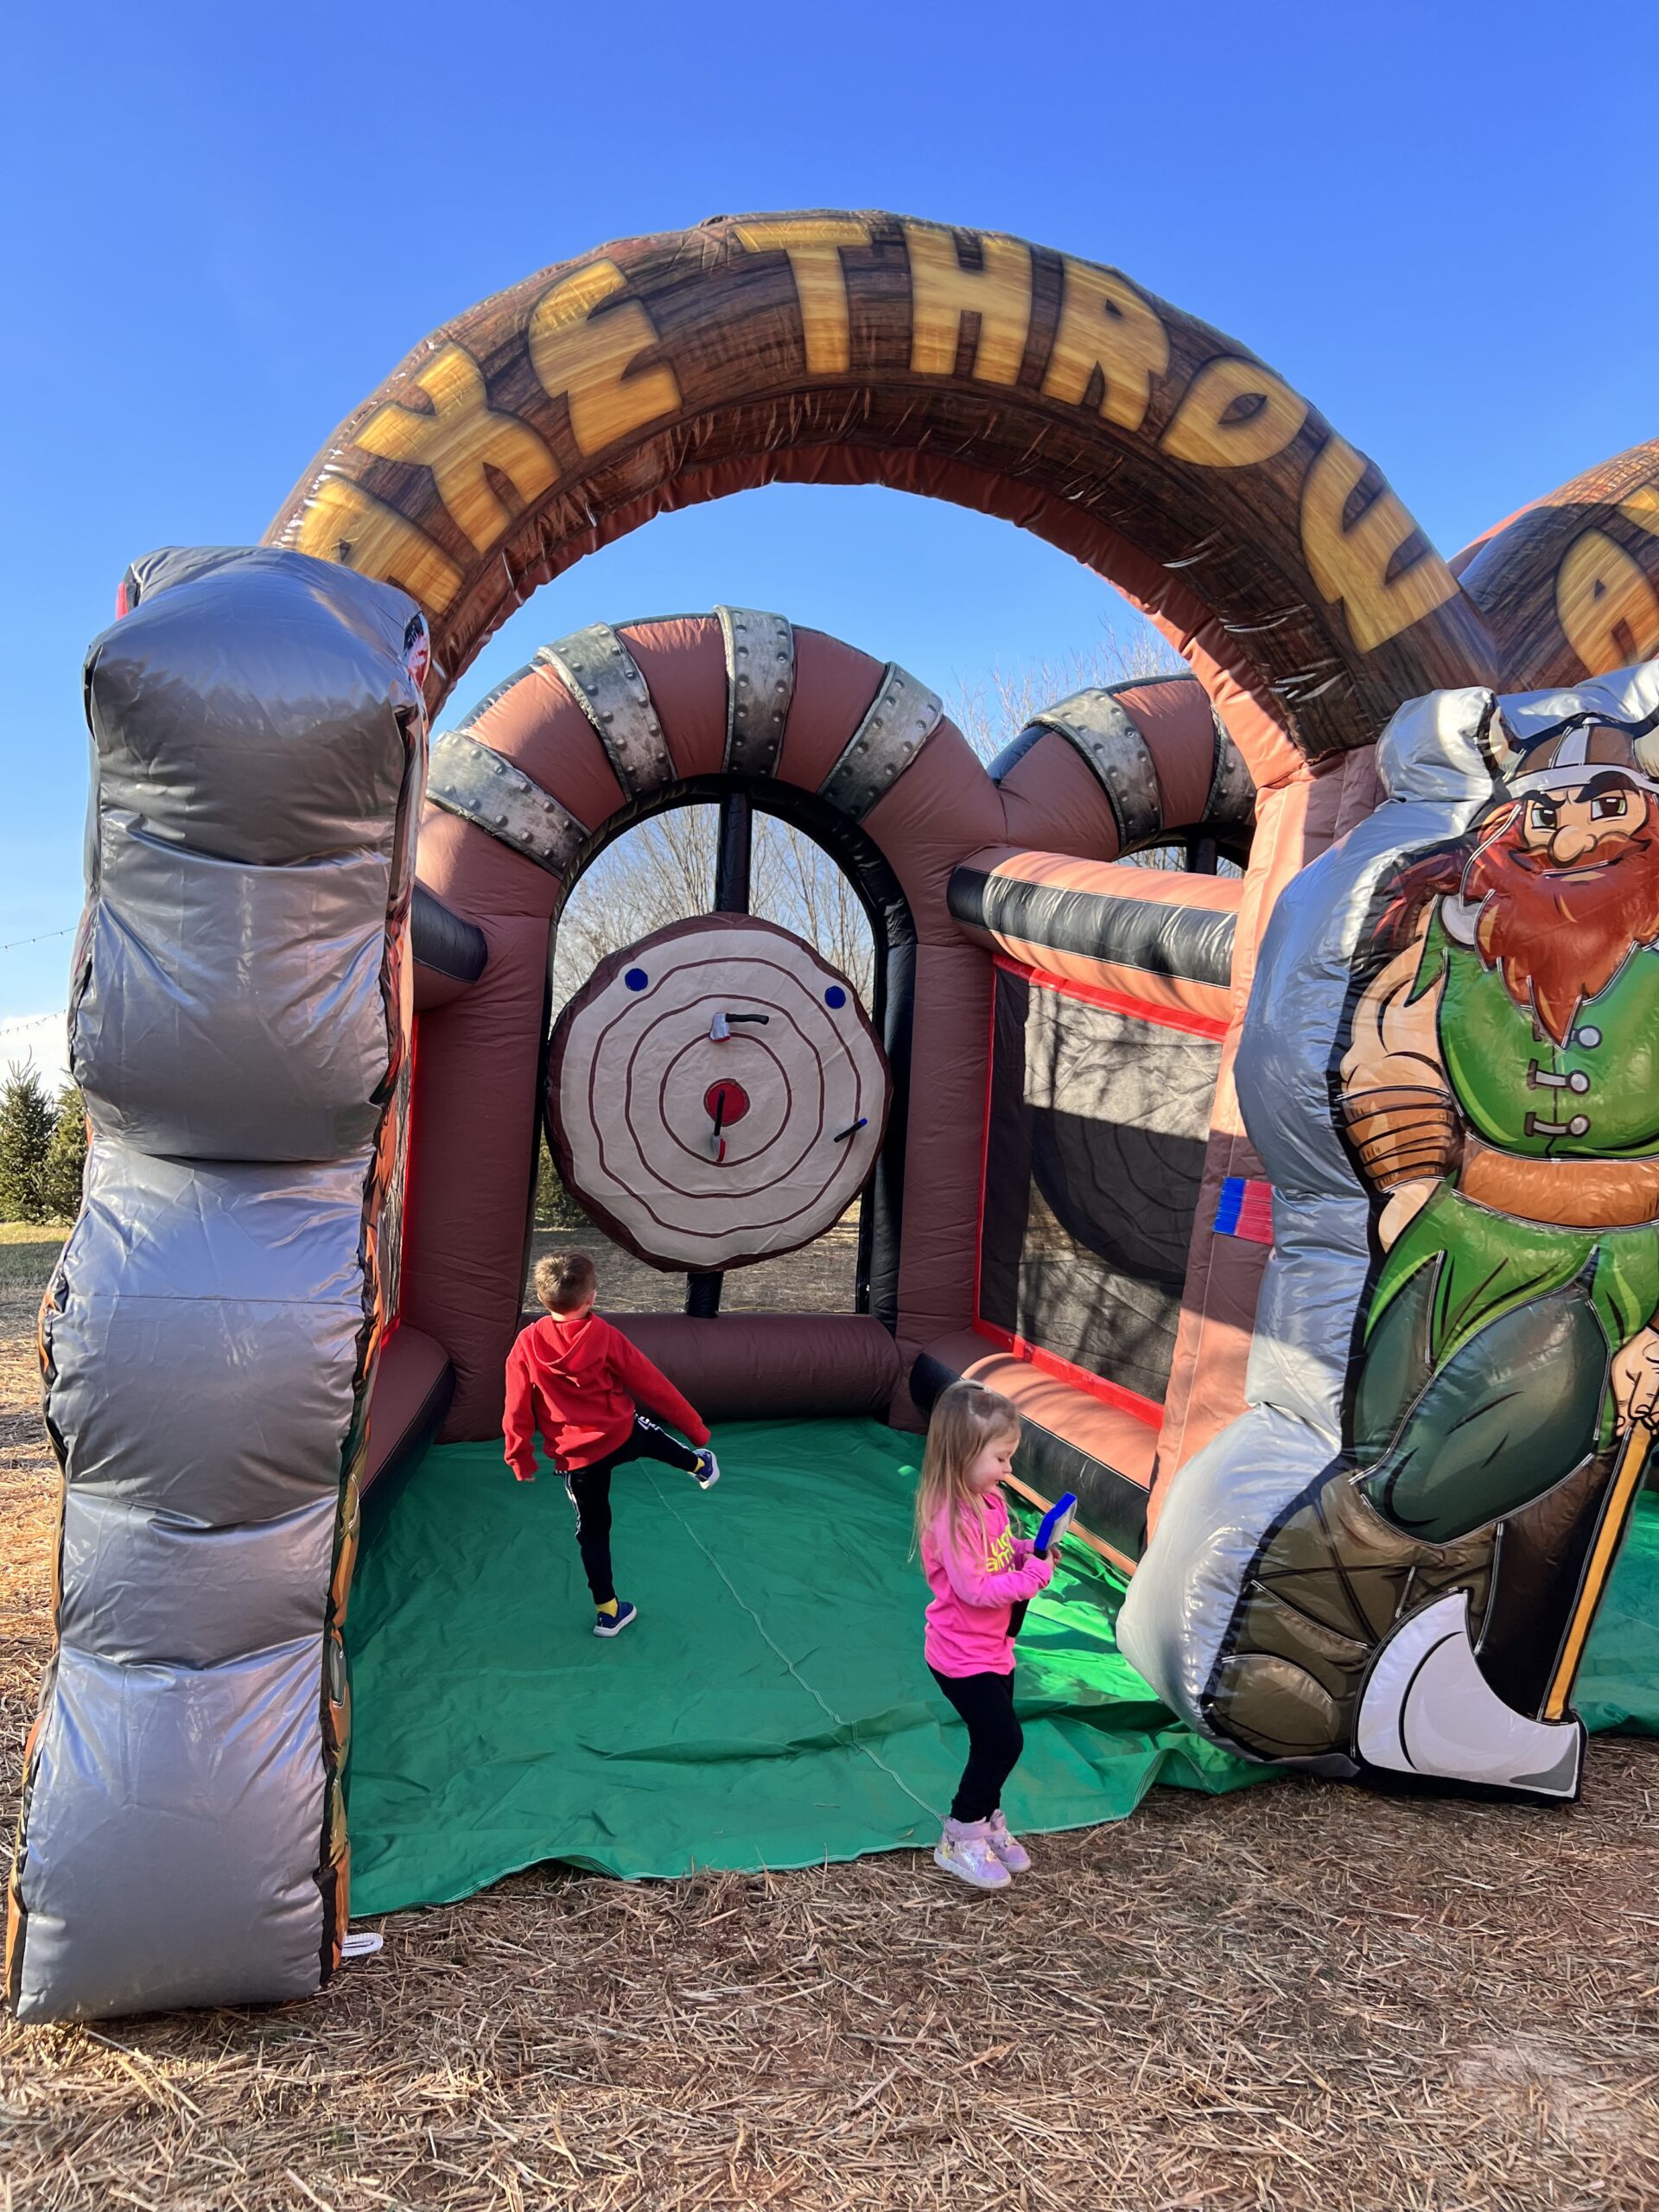 Ax throw party inflatable rental for parties in Shelby, North Carolina.